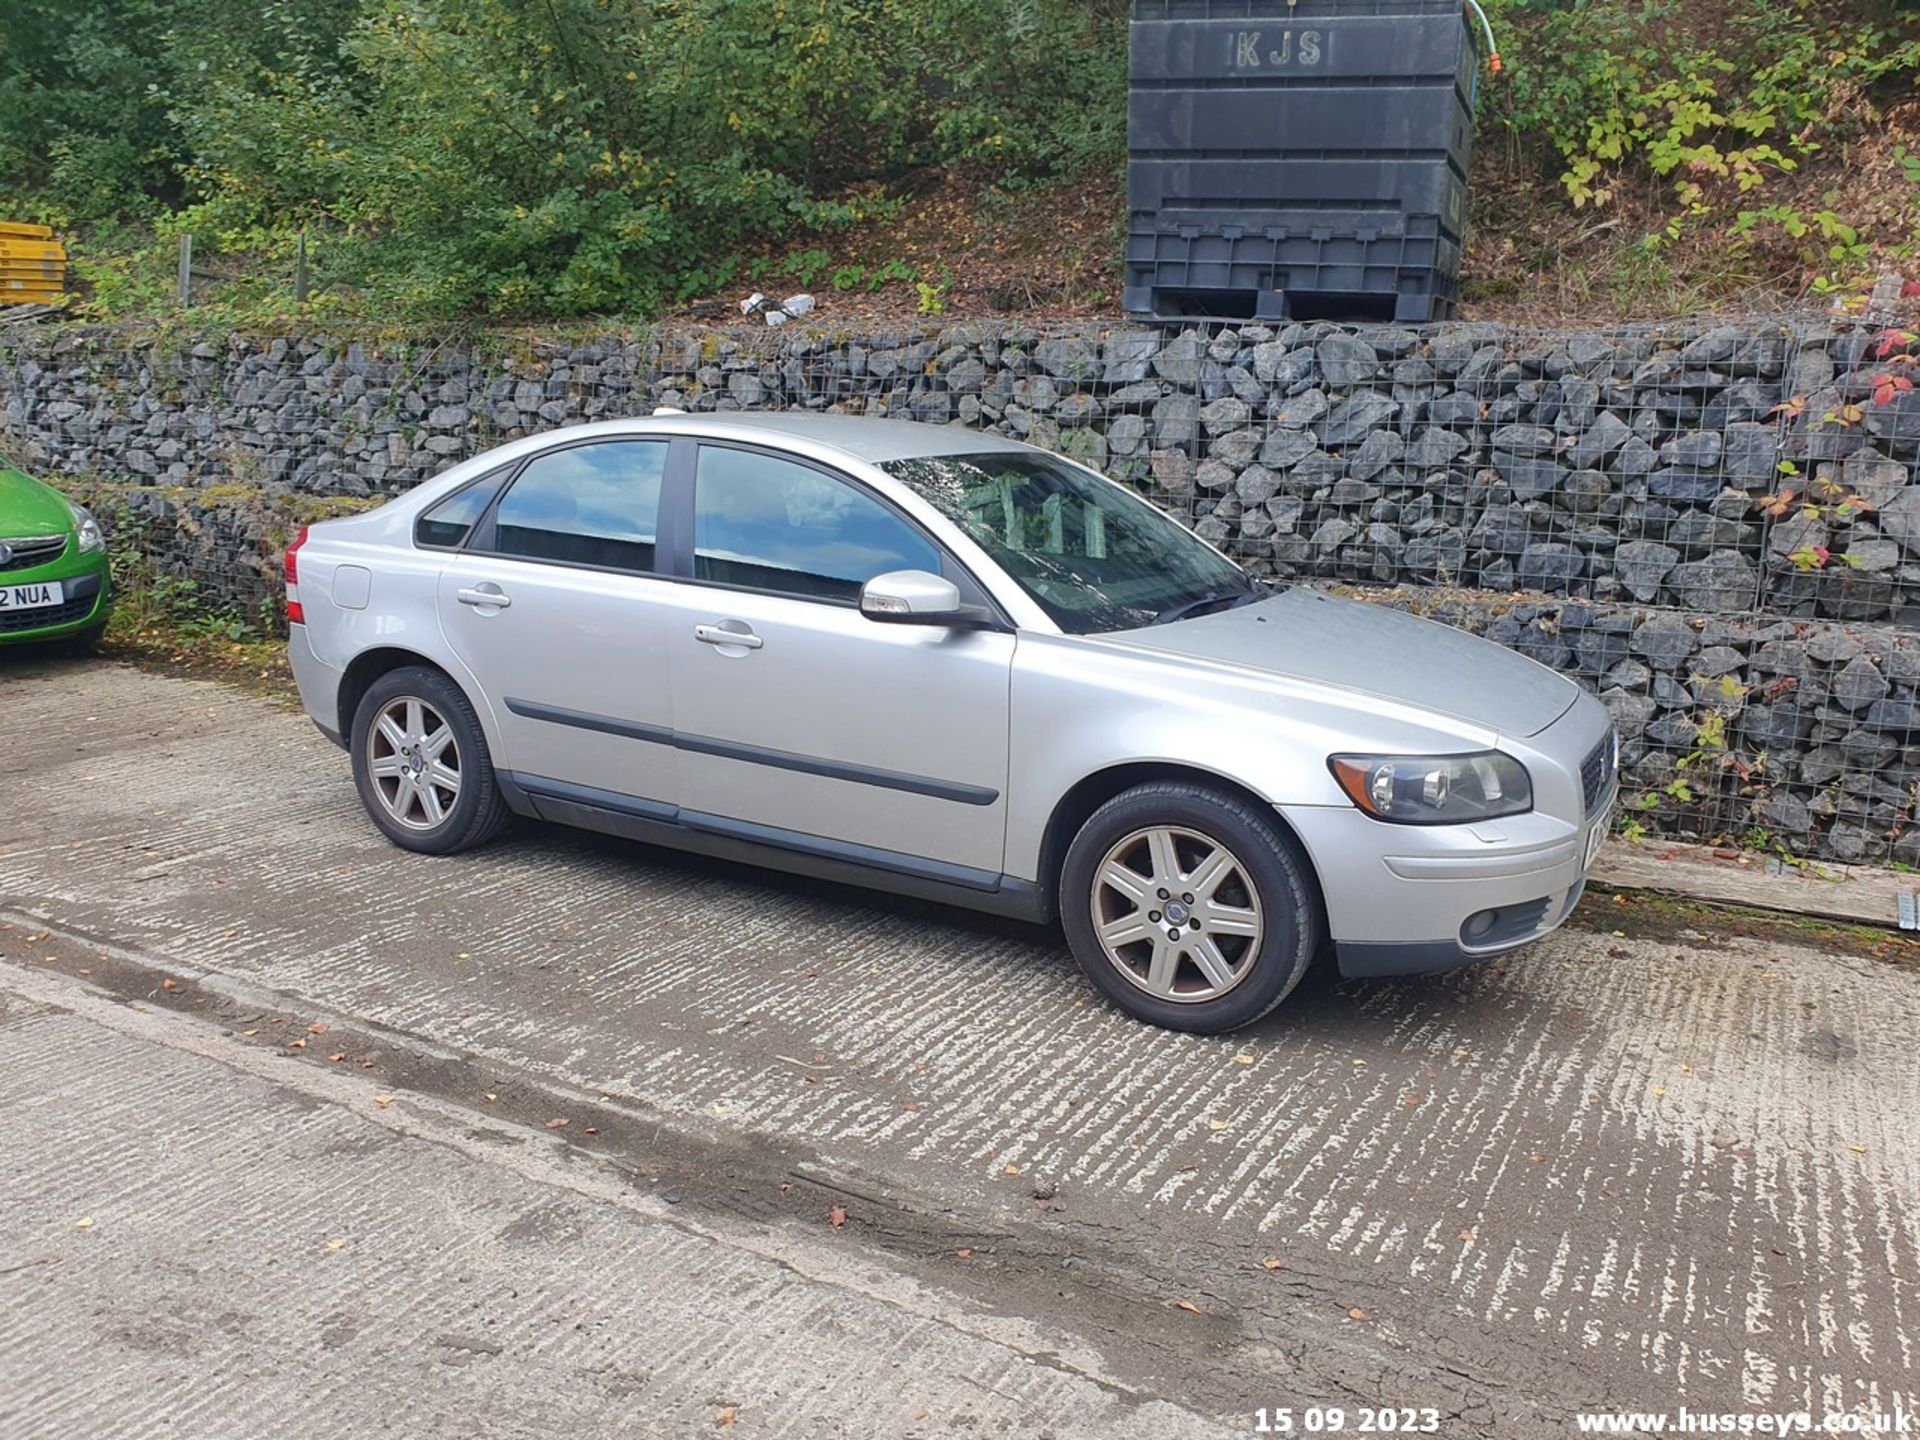 07/56 VOLVO S40 S - 1596cc 4dr Saloon (Silver, 161k) - Image 9 of 29